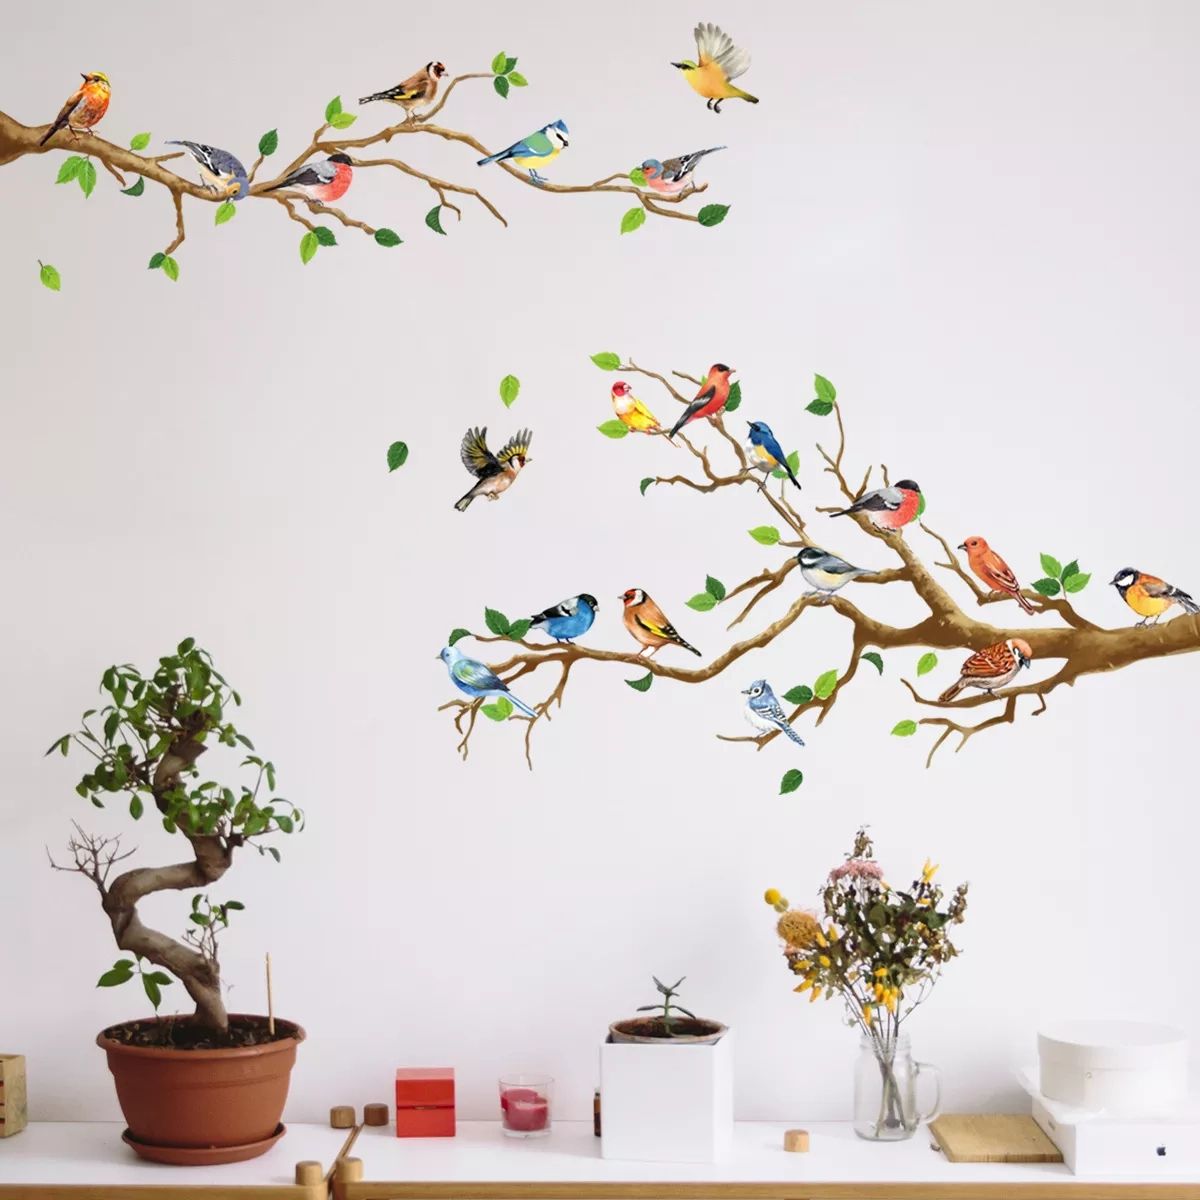 Colored Branches And Birds Wall Stickers For Bedroom Living Room Office  Background Wall Sofa Decorative Wall Art Stickers Pvc – Aliexpress Home &  Garden With Regard To Colorful Branching Wall Art (View 12 of 15)